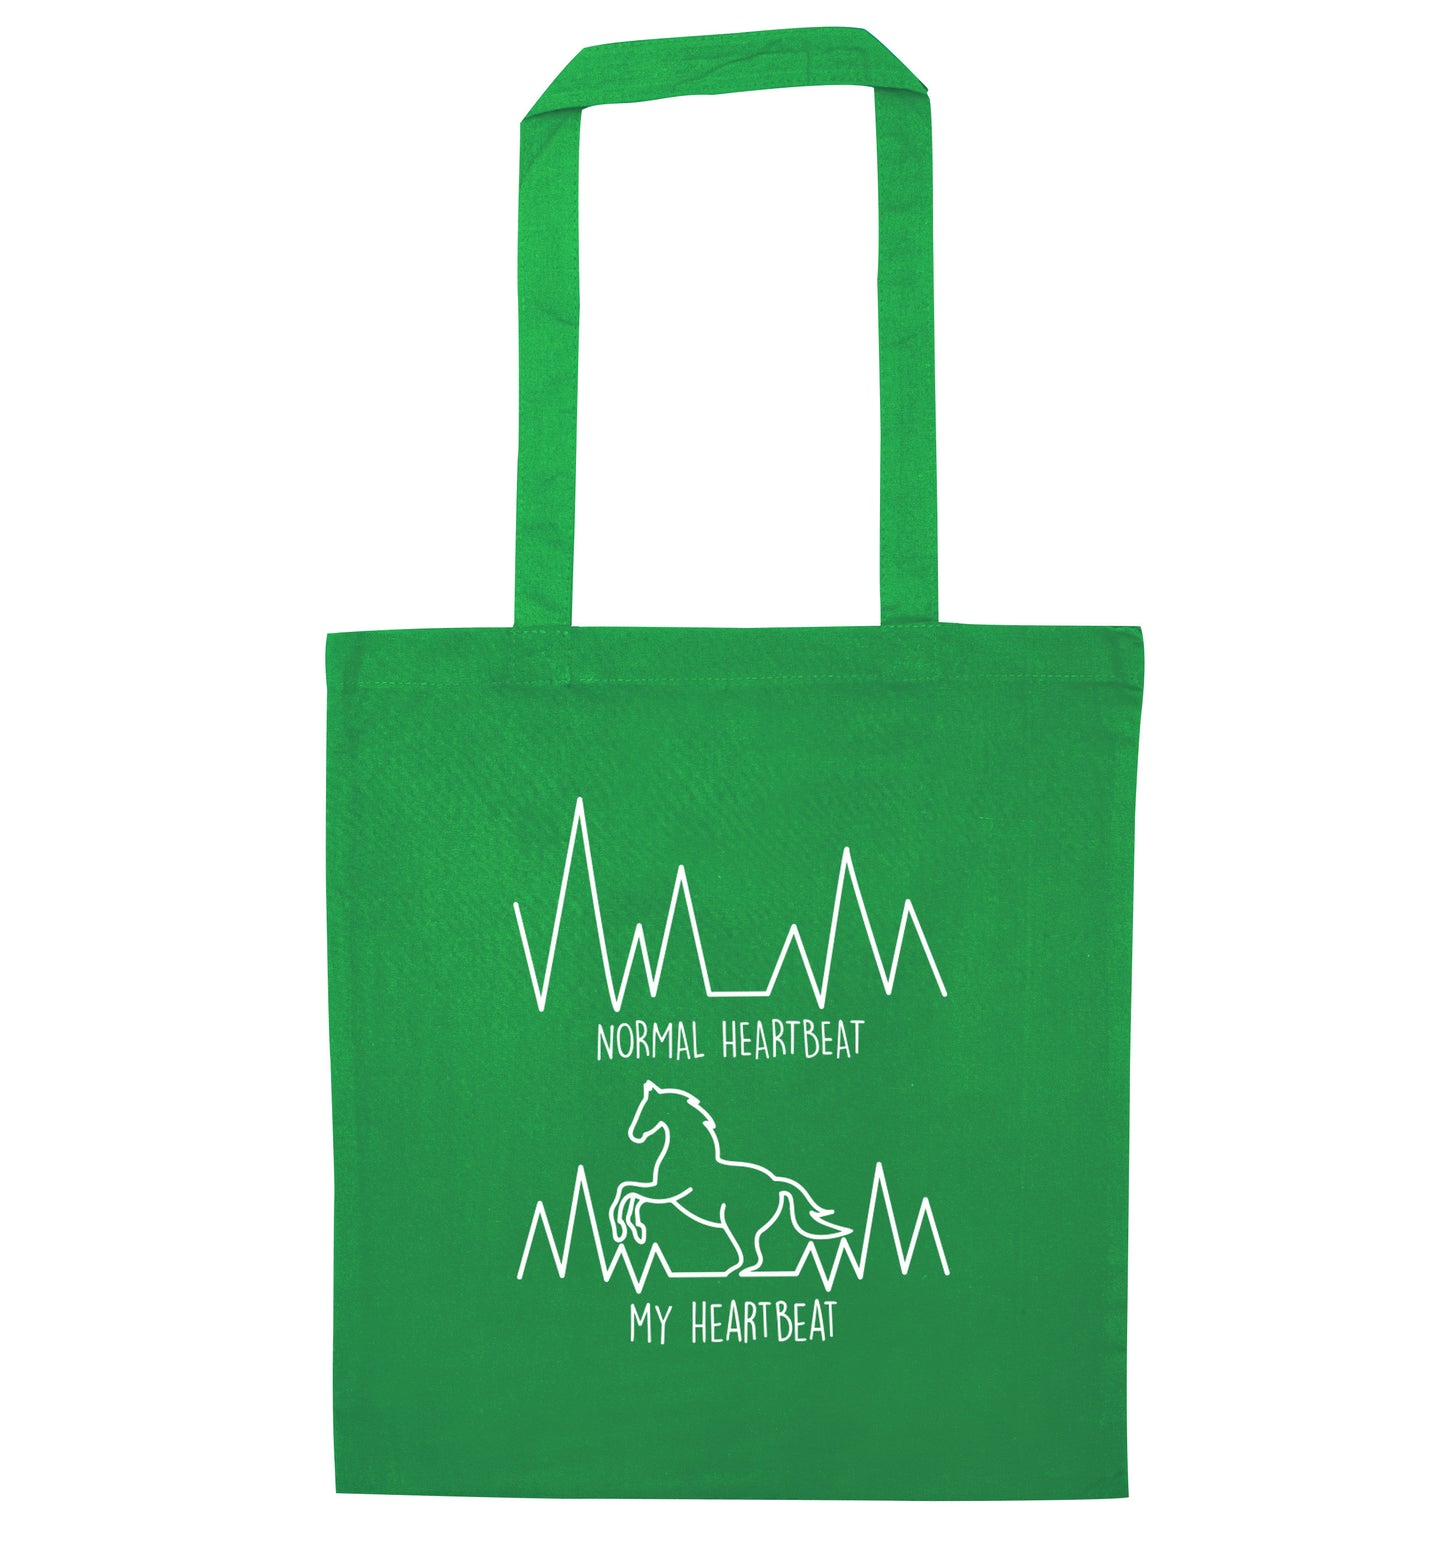 Normal heartbeat, my heartbeat horse lover green tote bag